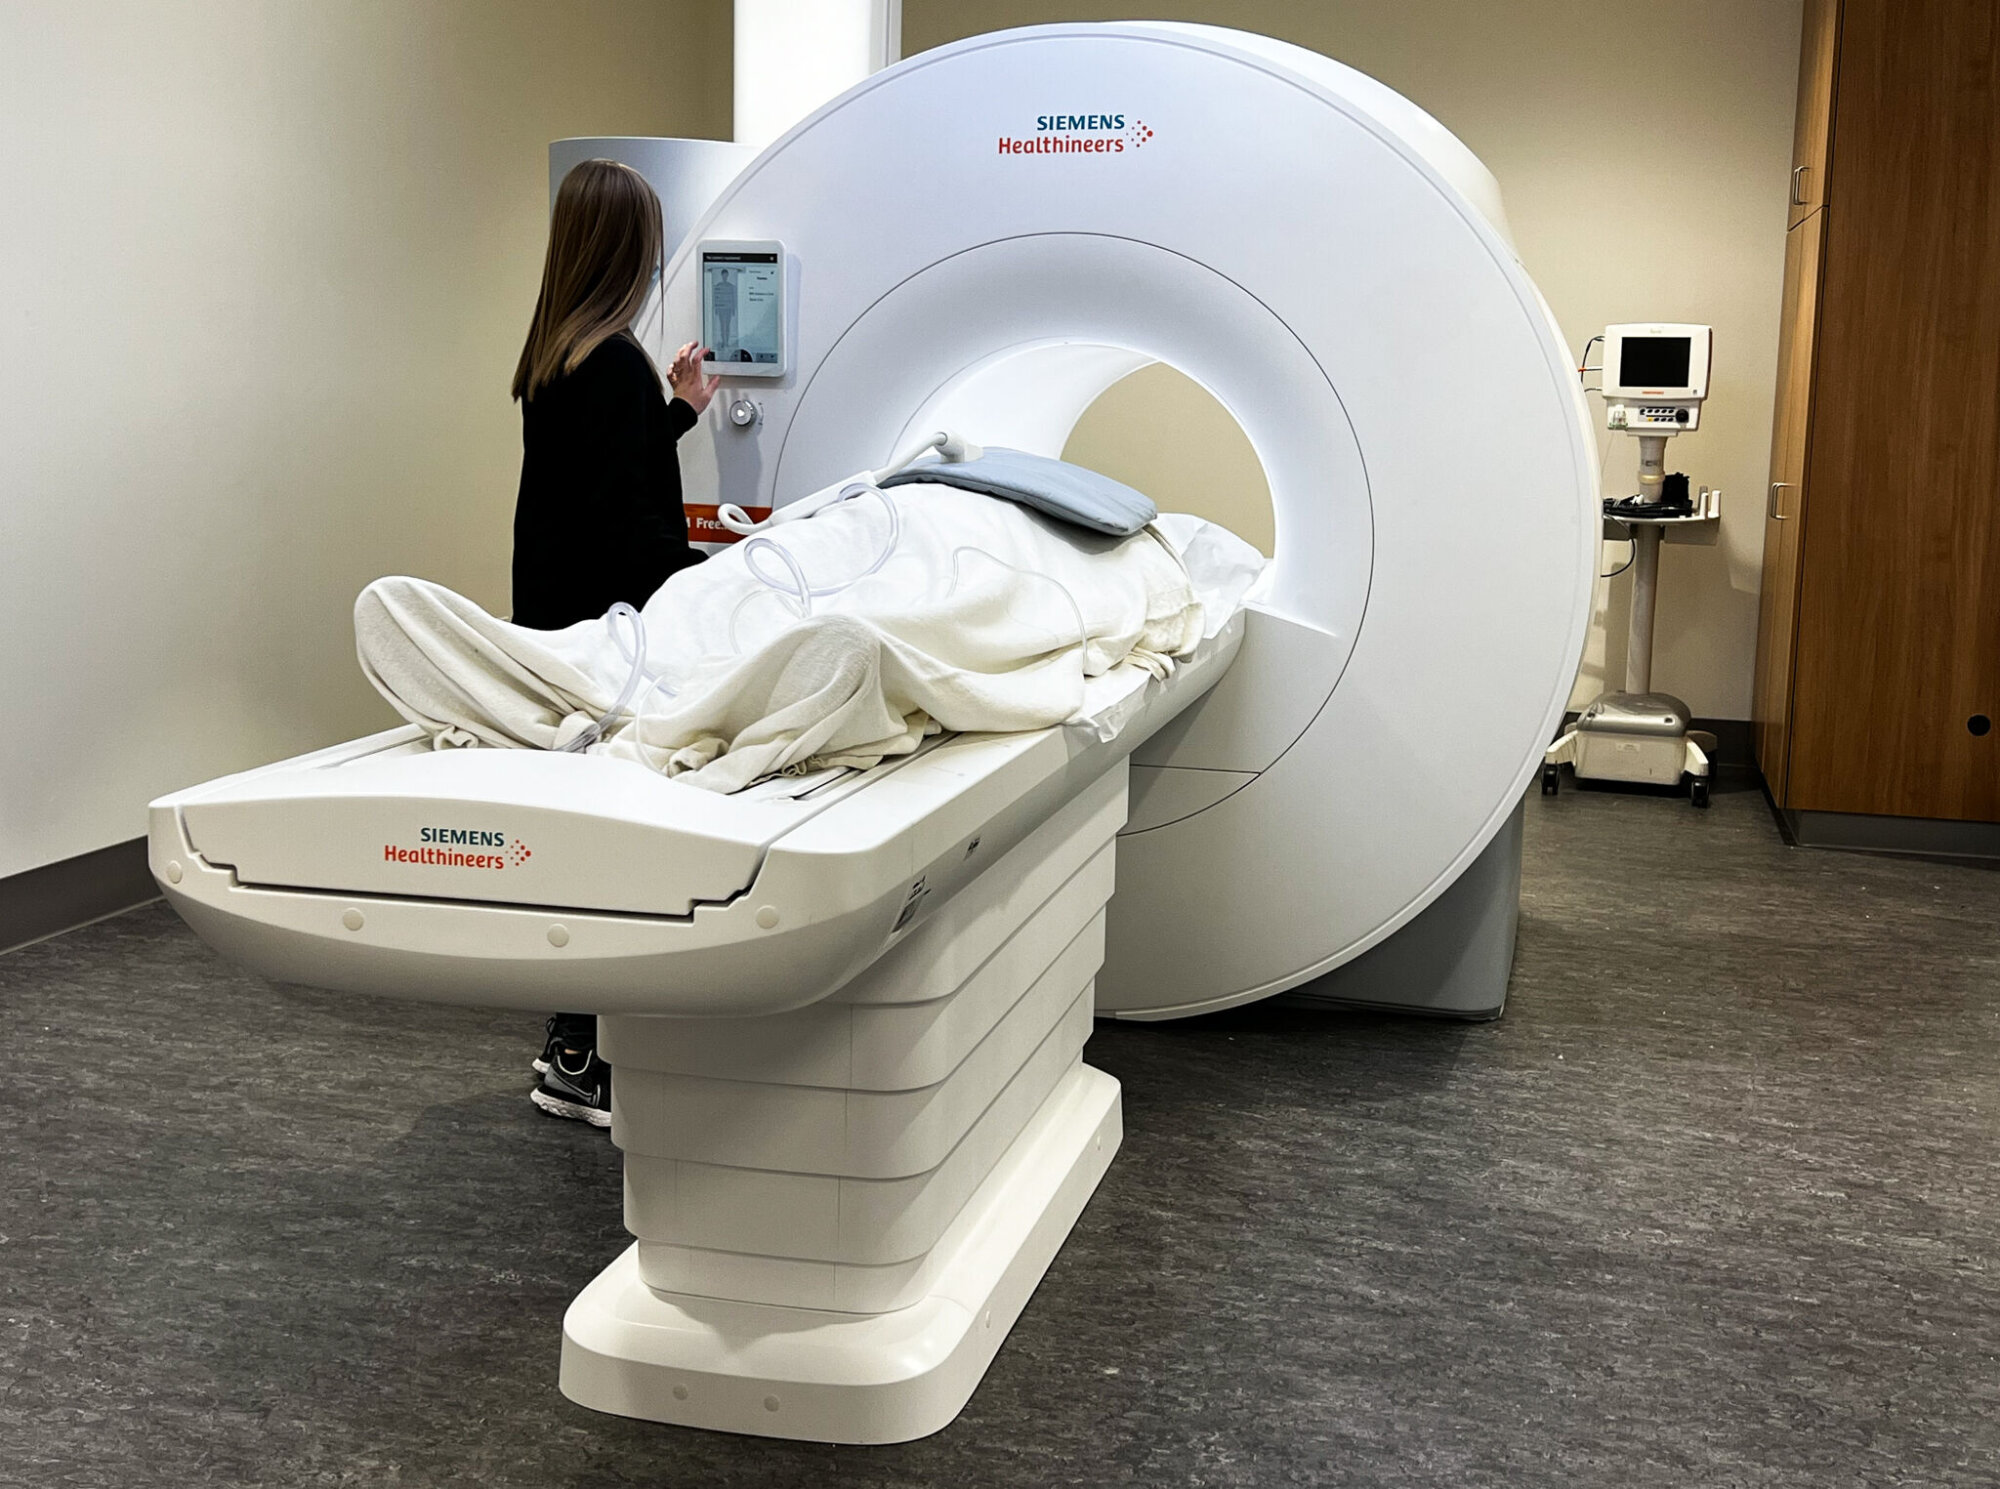 Antigua Takes Steps to Improve Healthcare Services with New MRI Machine